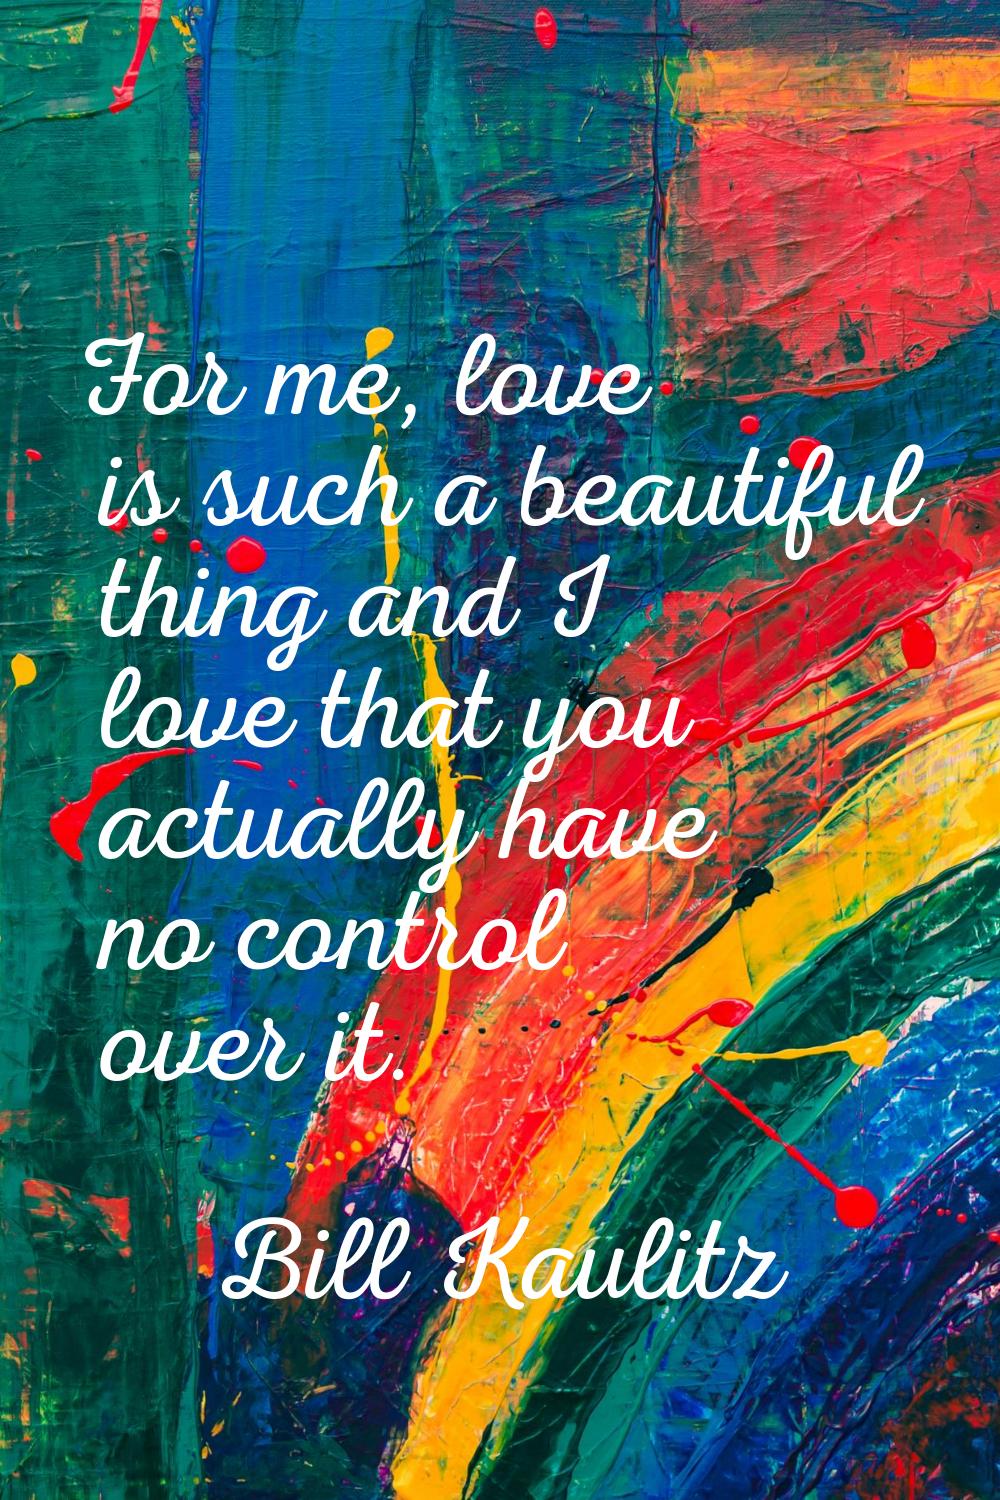 For me, love is such a beautiful thing and I love that you actually have no control over it.